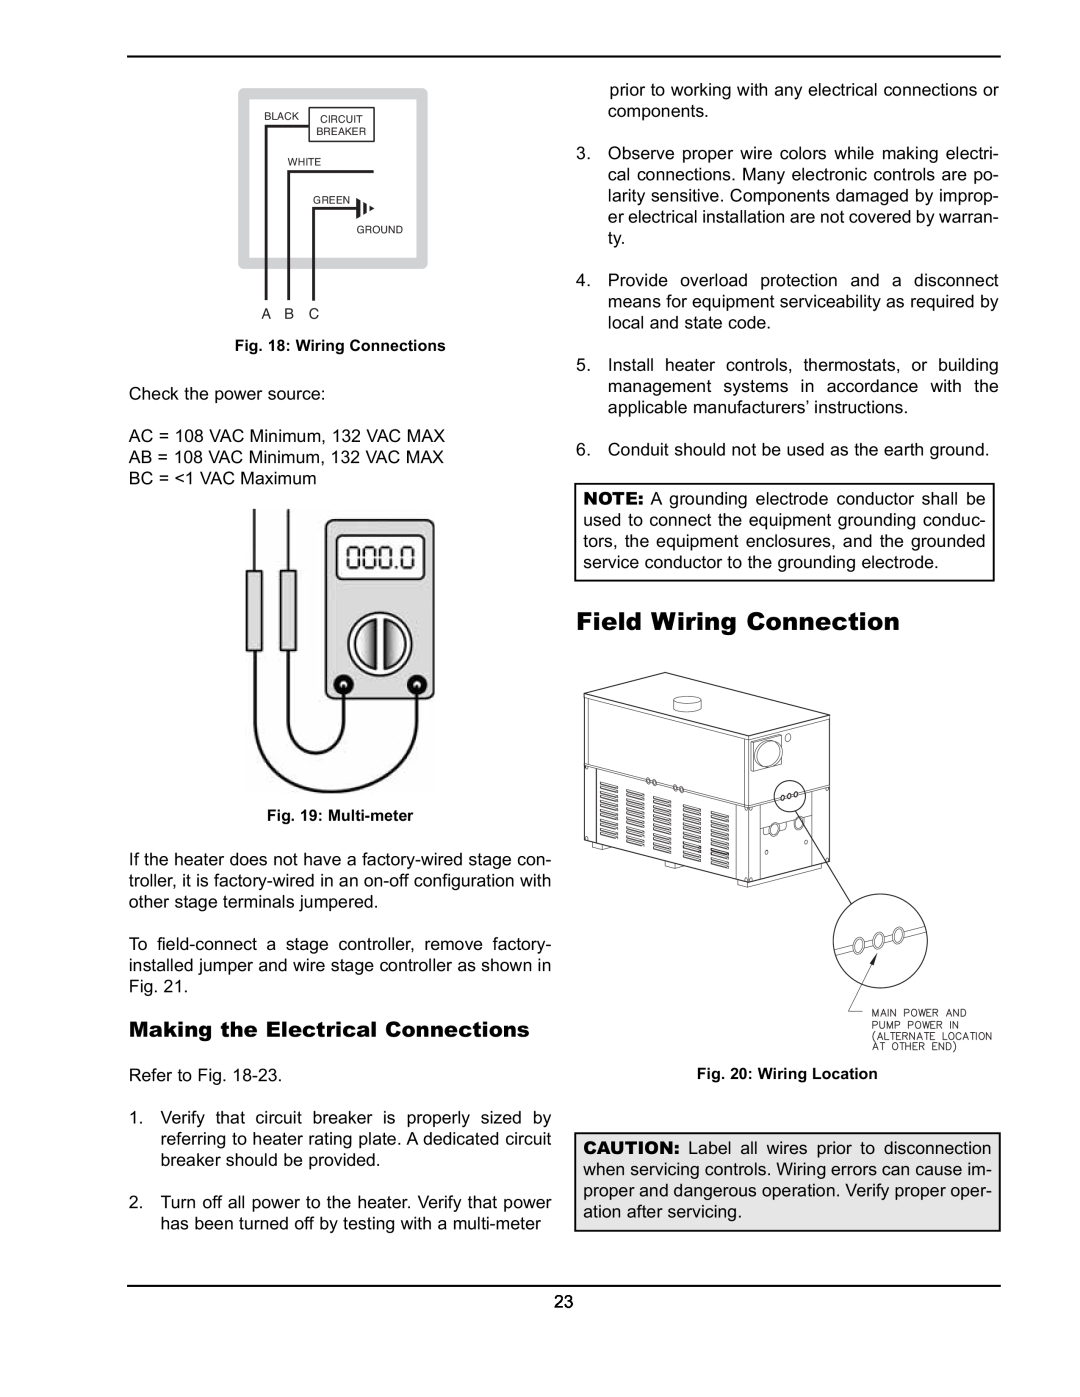 Raypak 302A-902A manual Field Wiring Connection, Making the Electrical Connections 